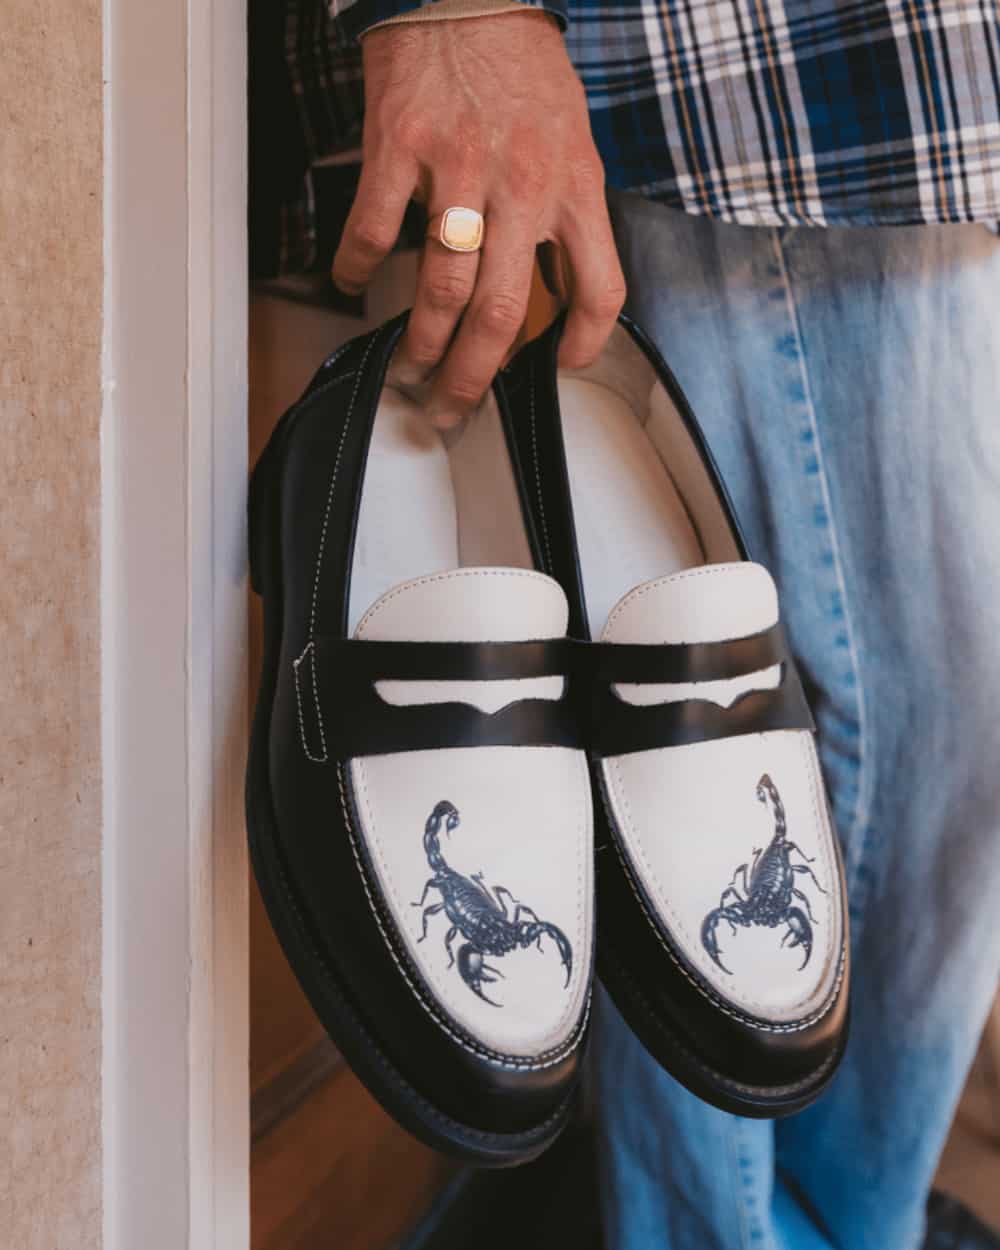 Man holding a pair of black and white spectator penny loafers with a blue printed scorpion on the toe by Duke & Dexter